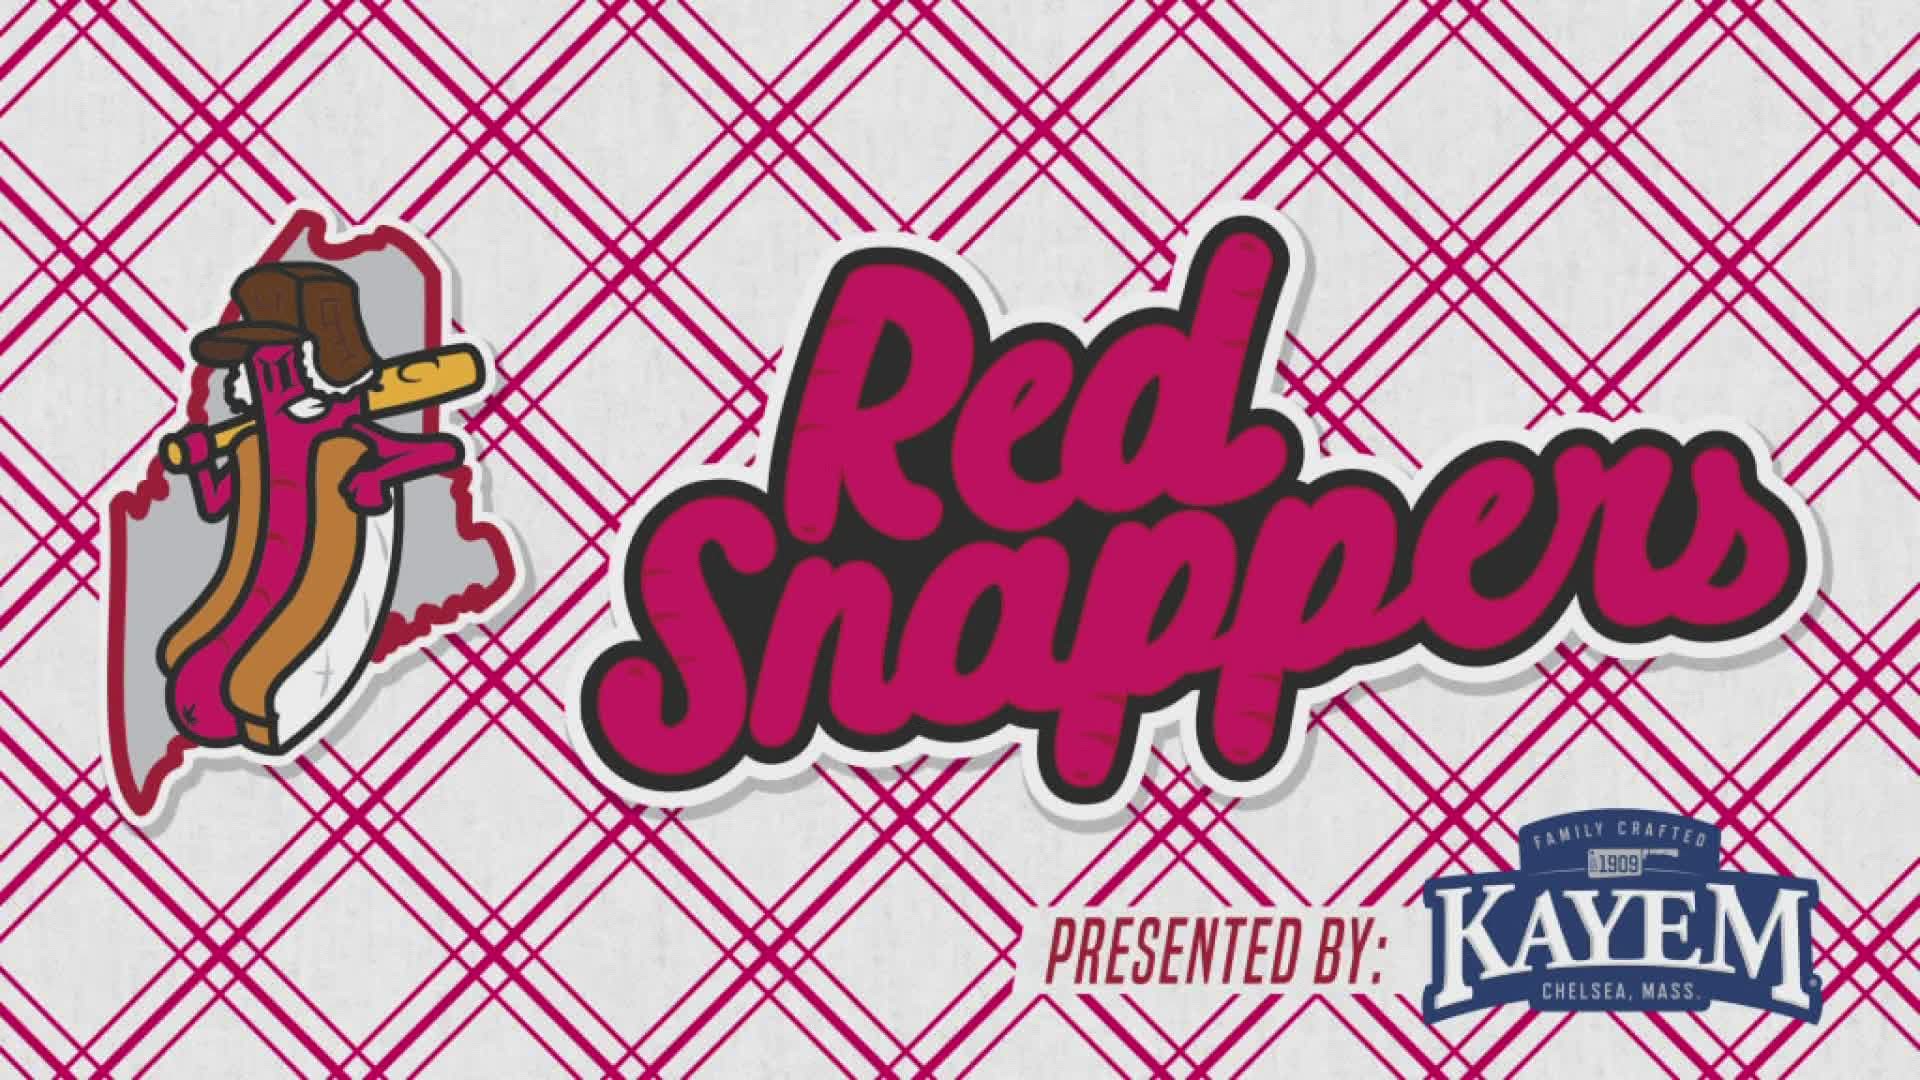 The Portland Sea Dogs will become the Maine red snappers for a game on Saturday, July 24th at 6pm.  The name change pays homage to Maine's iconic red hot dog.